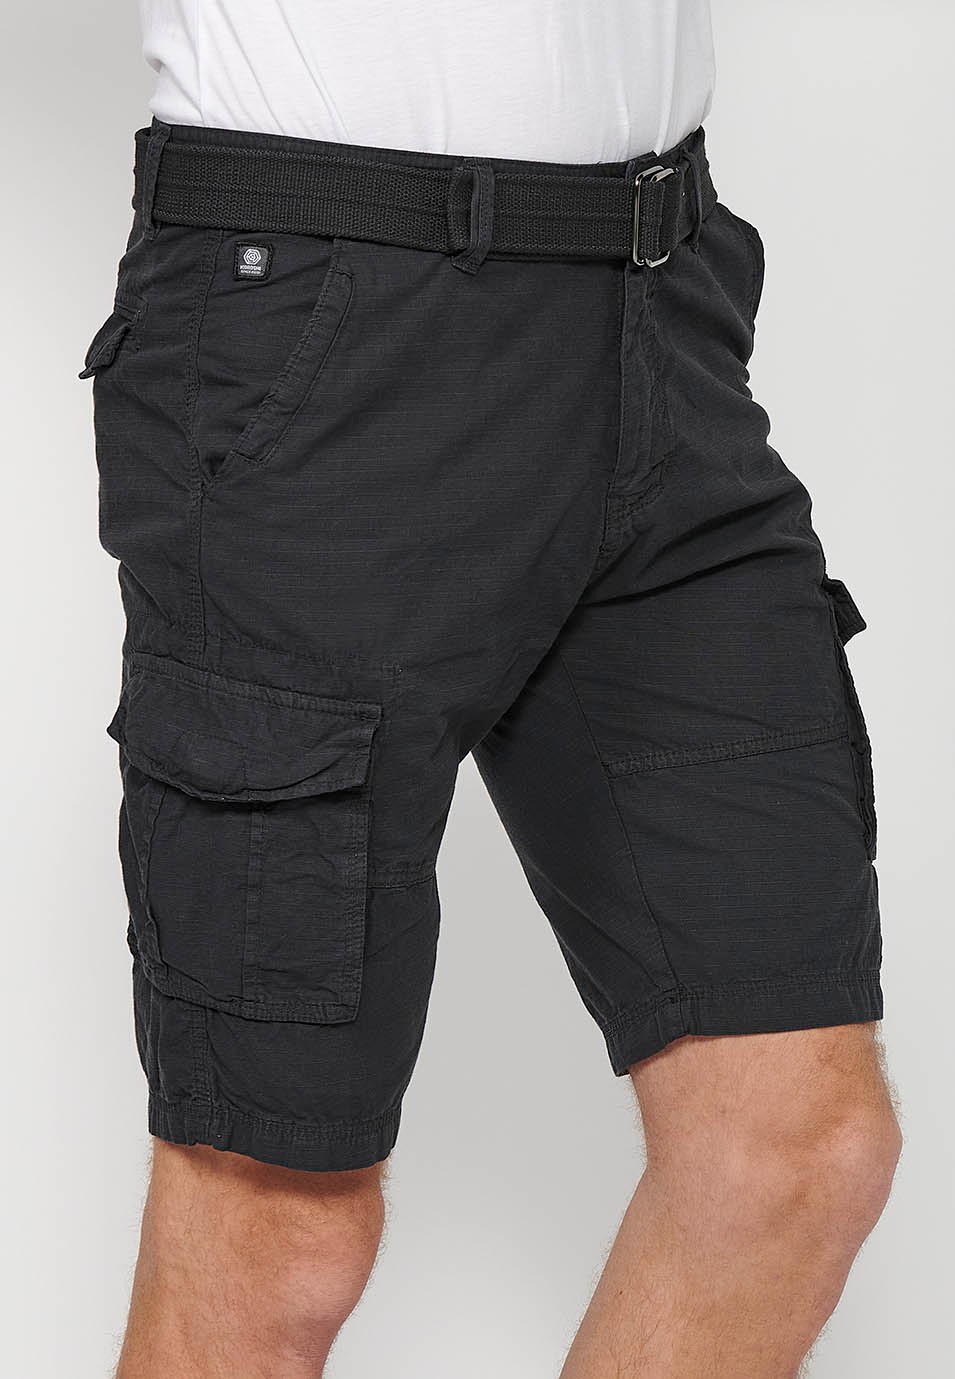 Cotton Cargo Shorts with Belt and Front Closure with Zipper and Button with Pockets, Two Back Pockets with Flap and Two Black Cargo Pants for Men 4